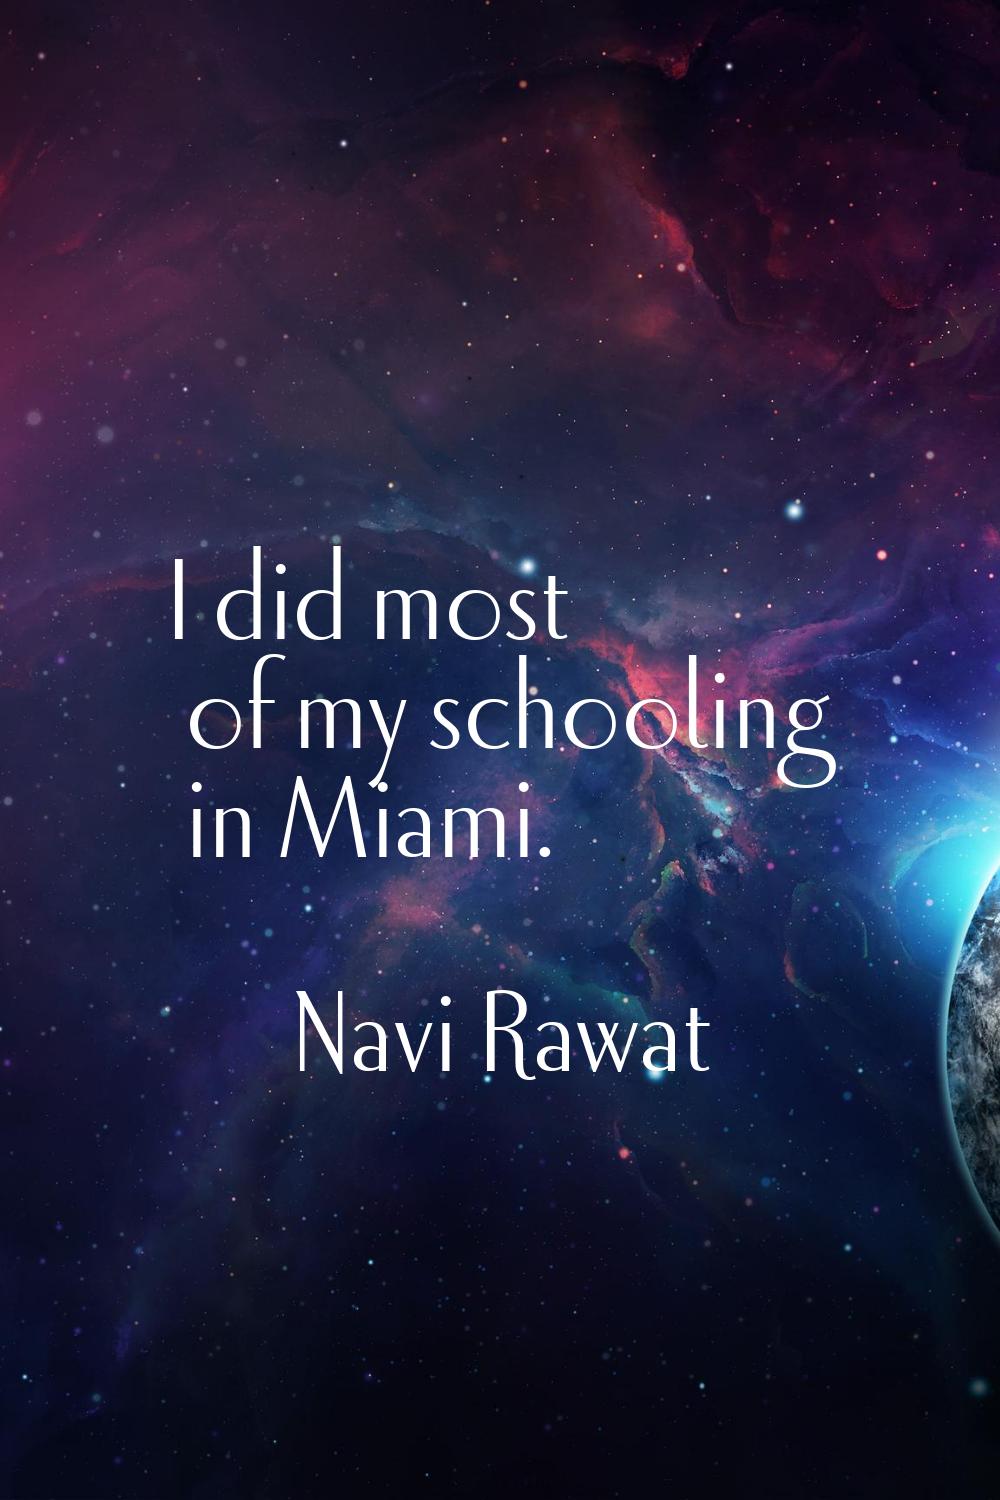 I did most of my schooling in Miami.